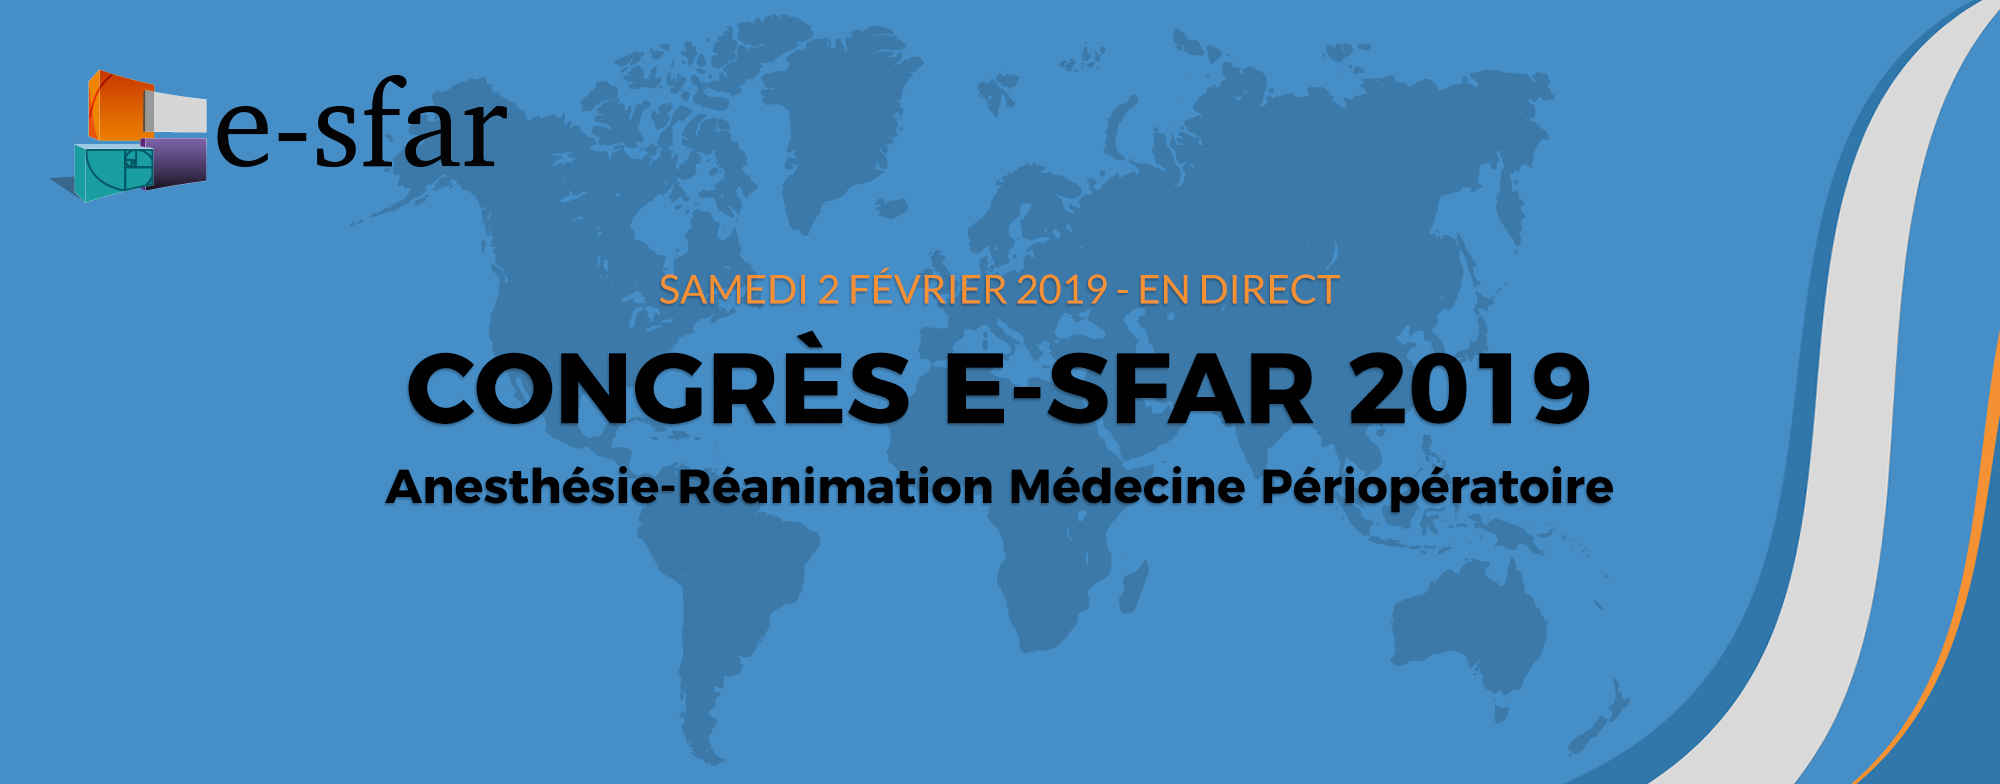 Online congress of the French Society of Anesthesia and Resuscitation E-SFAR 2019